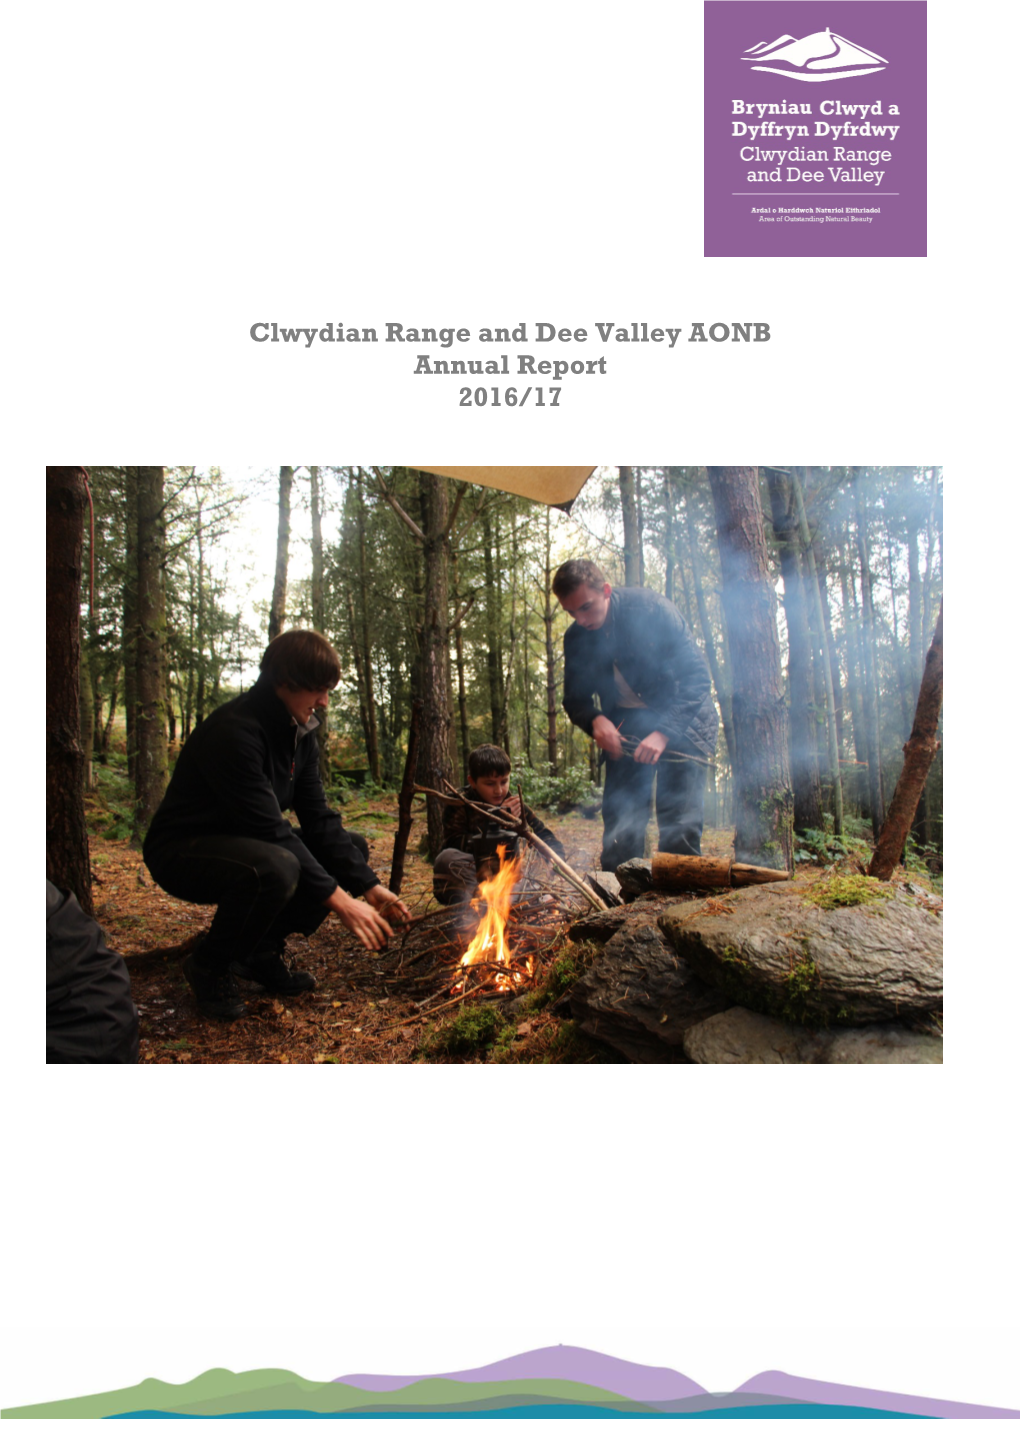 Clwydian Range and Dee Valley AONB Annual Report 2016/17